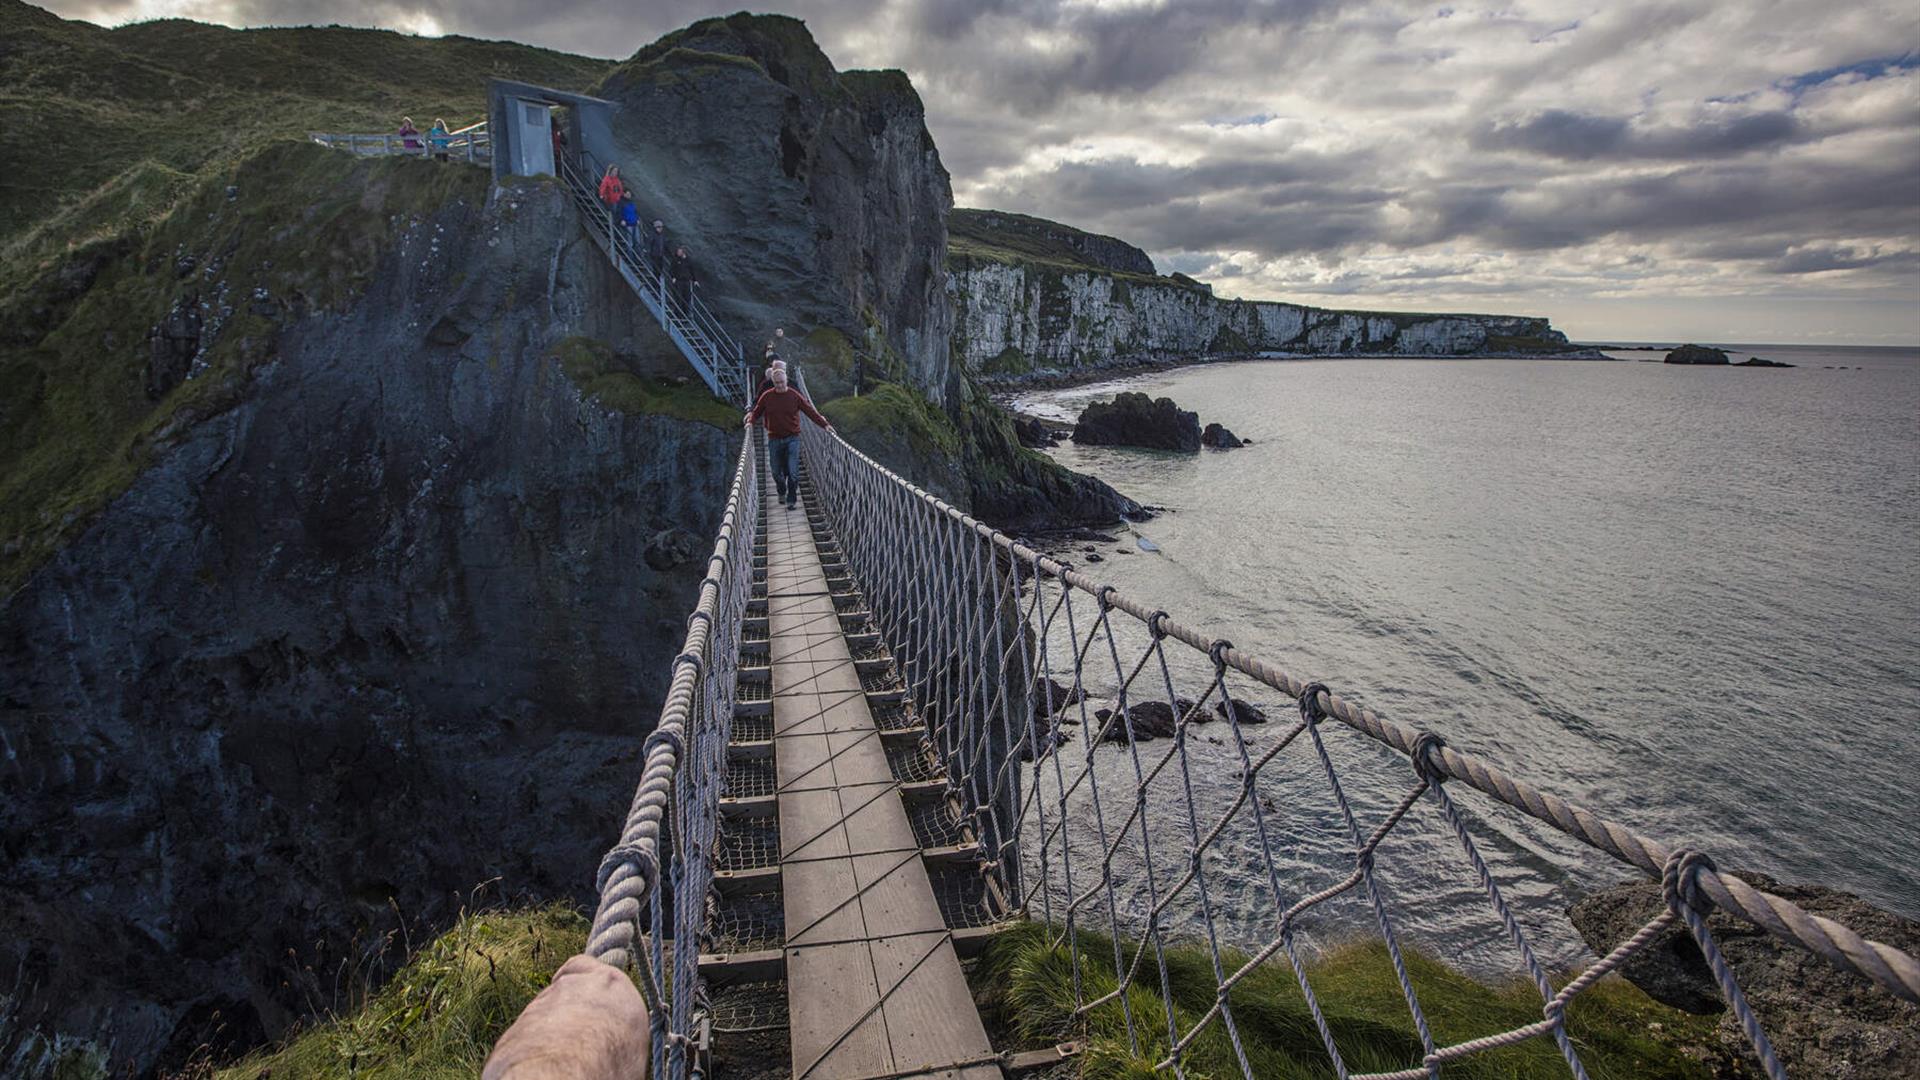 Carrick-a-Rede Bridge - - Discover Northern